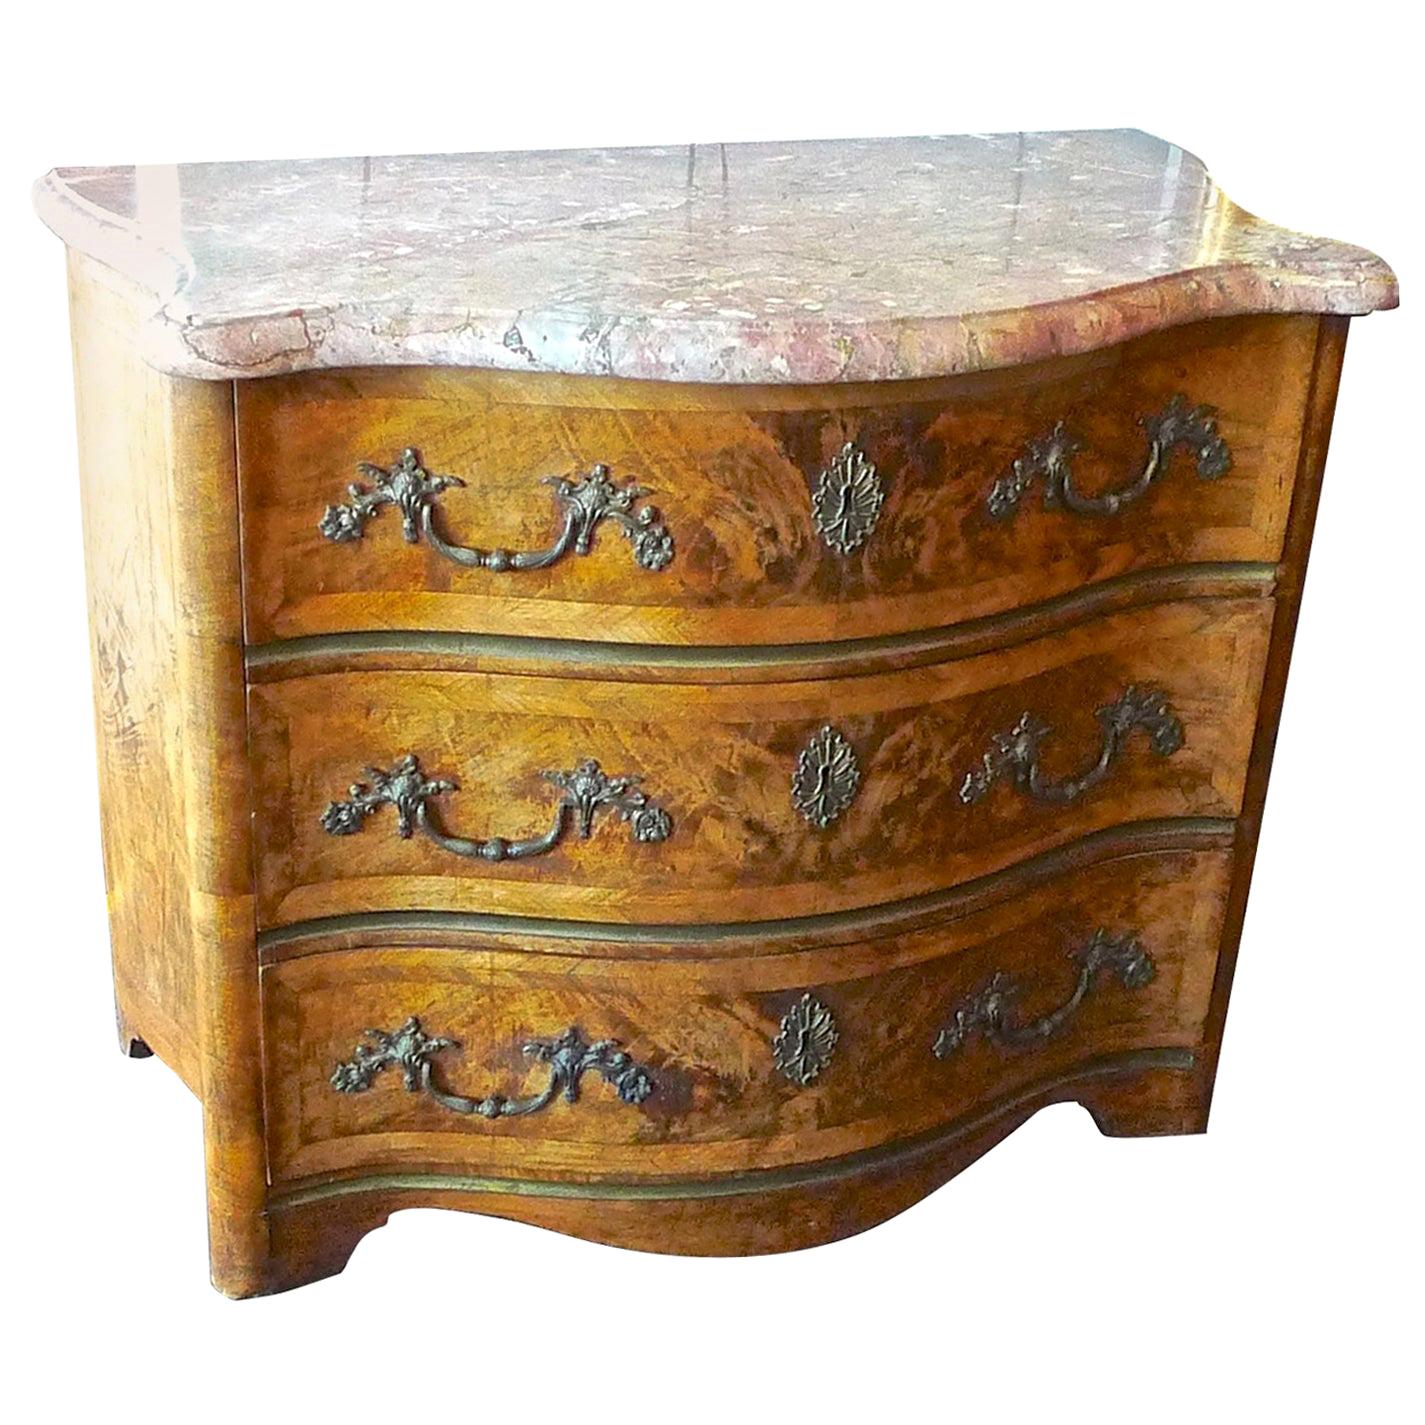 French 19th century bow-fronted burl walnut chest of drawers with a marble top and original hardware.